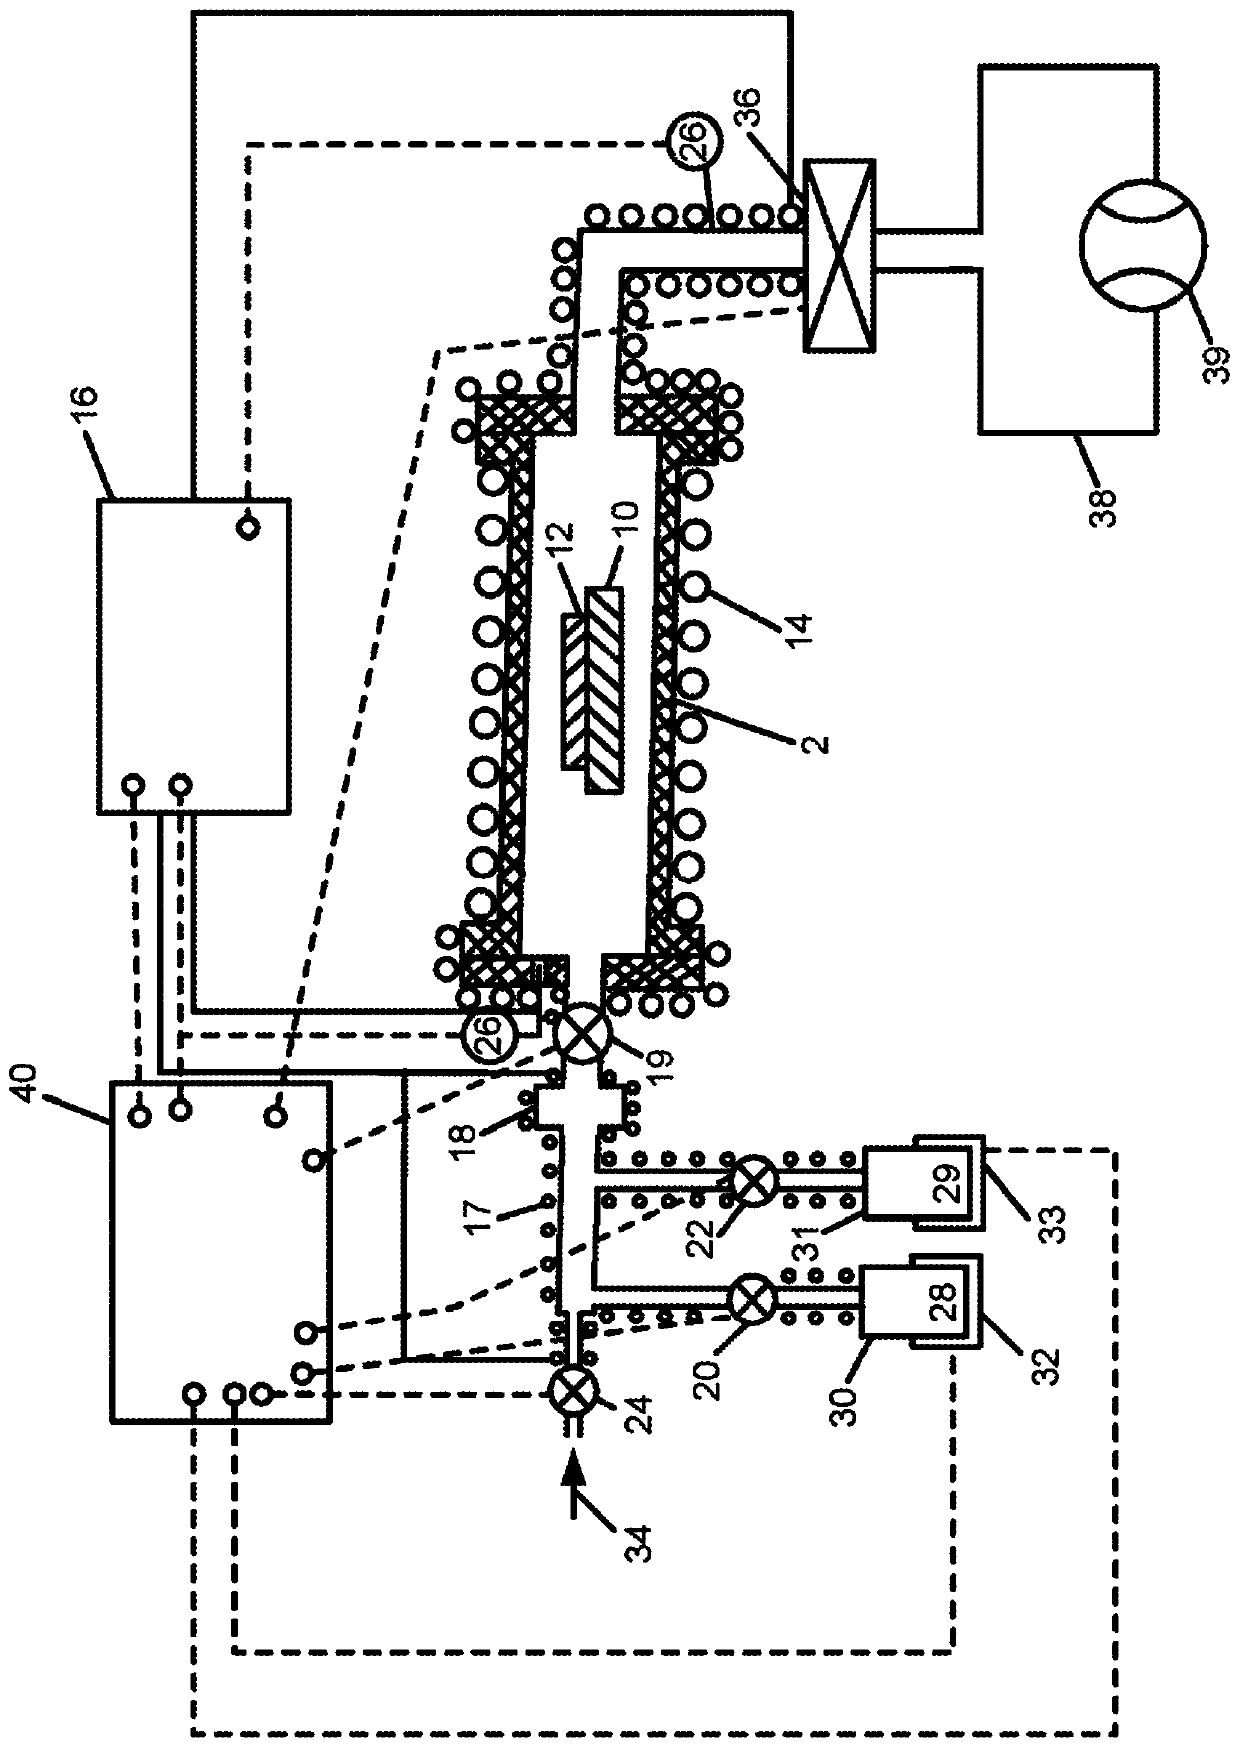 Sequential infiltration synthesis apparatus